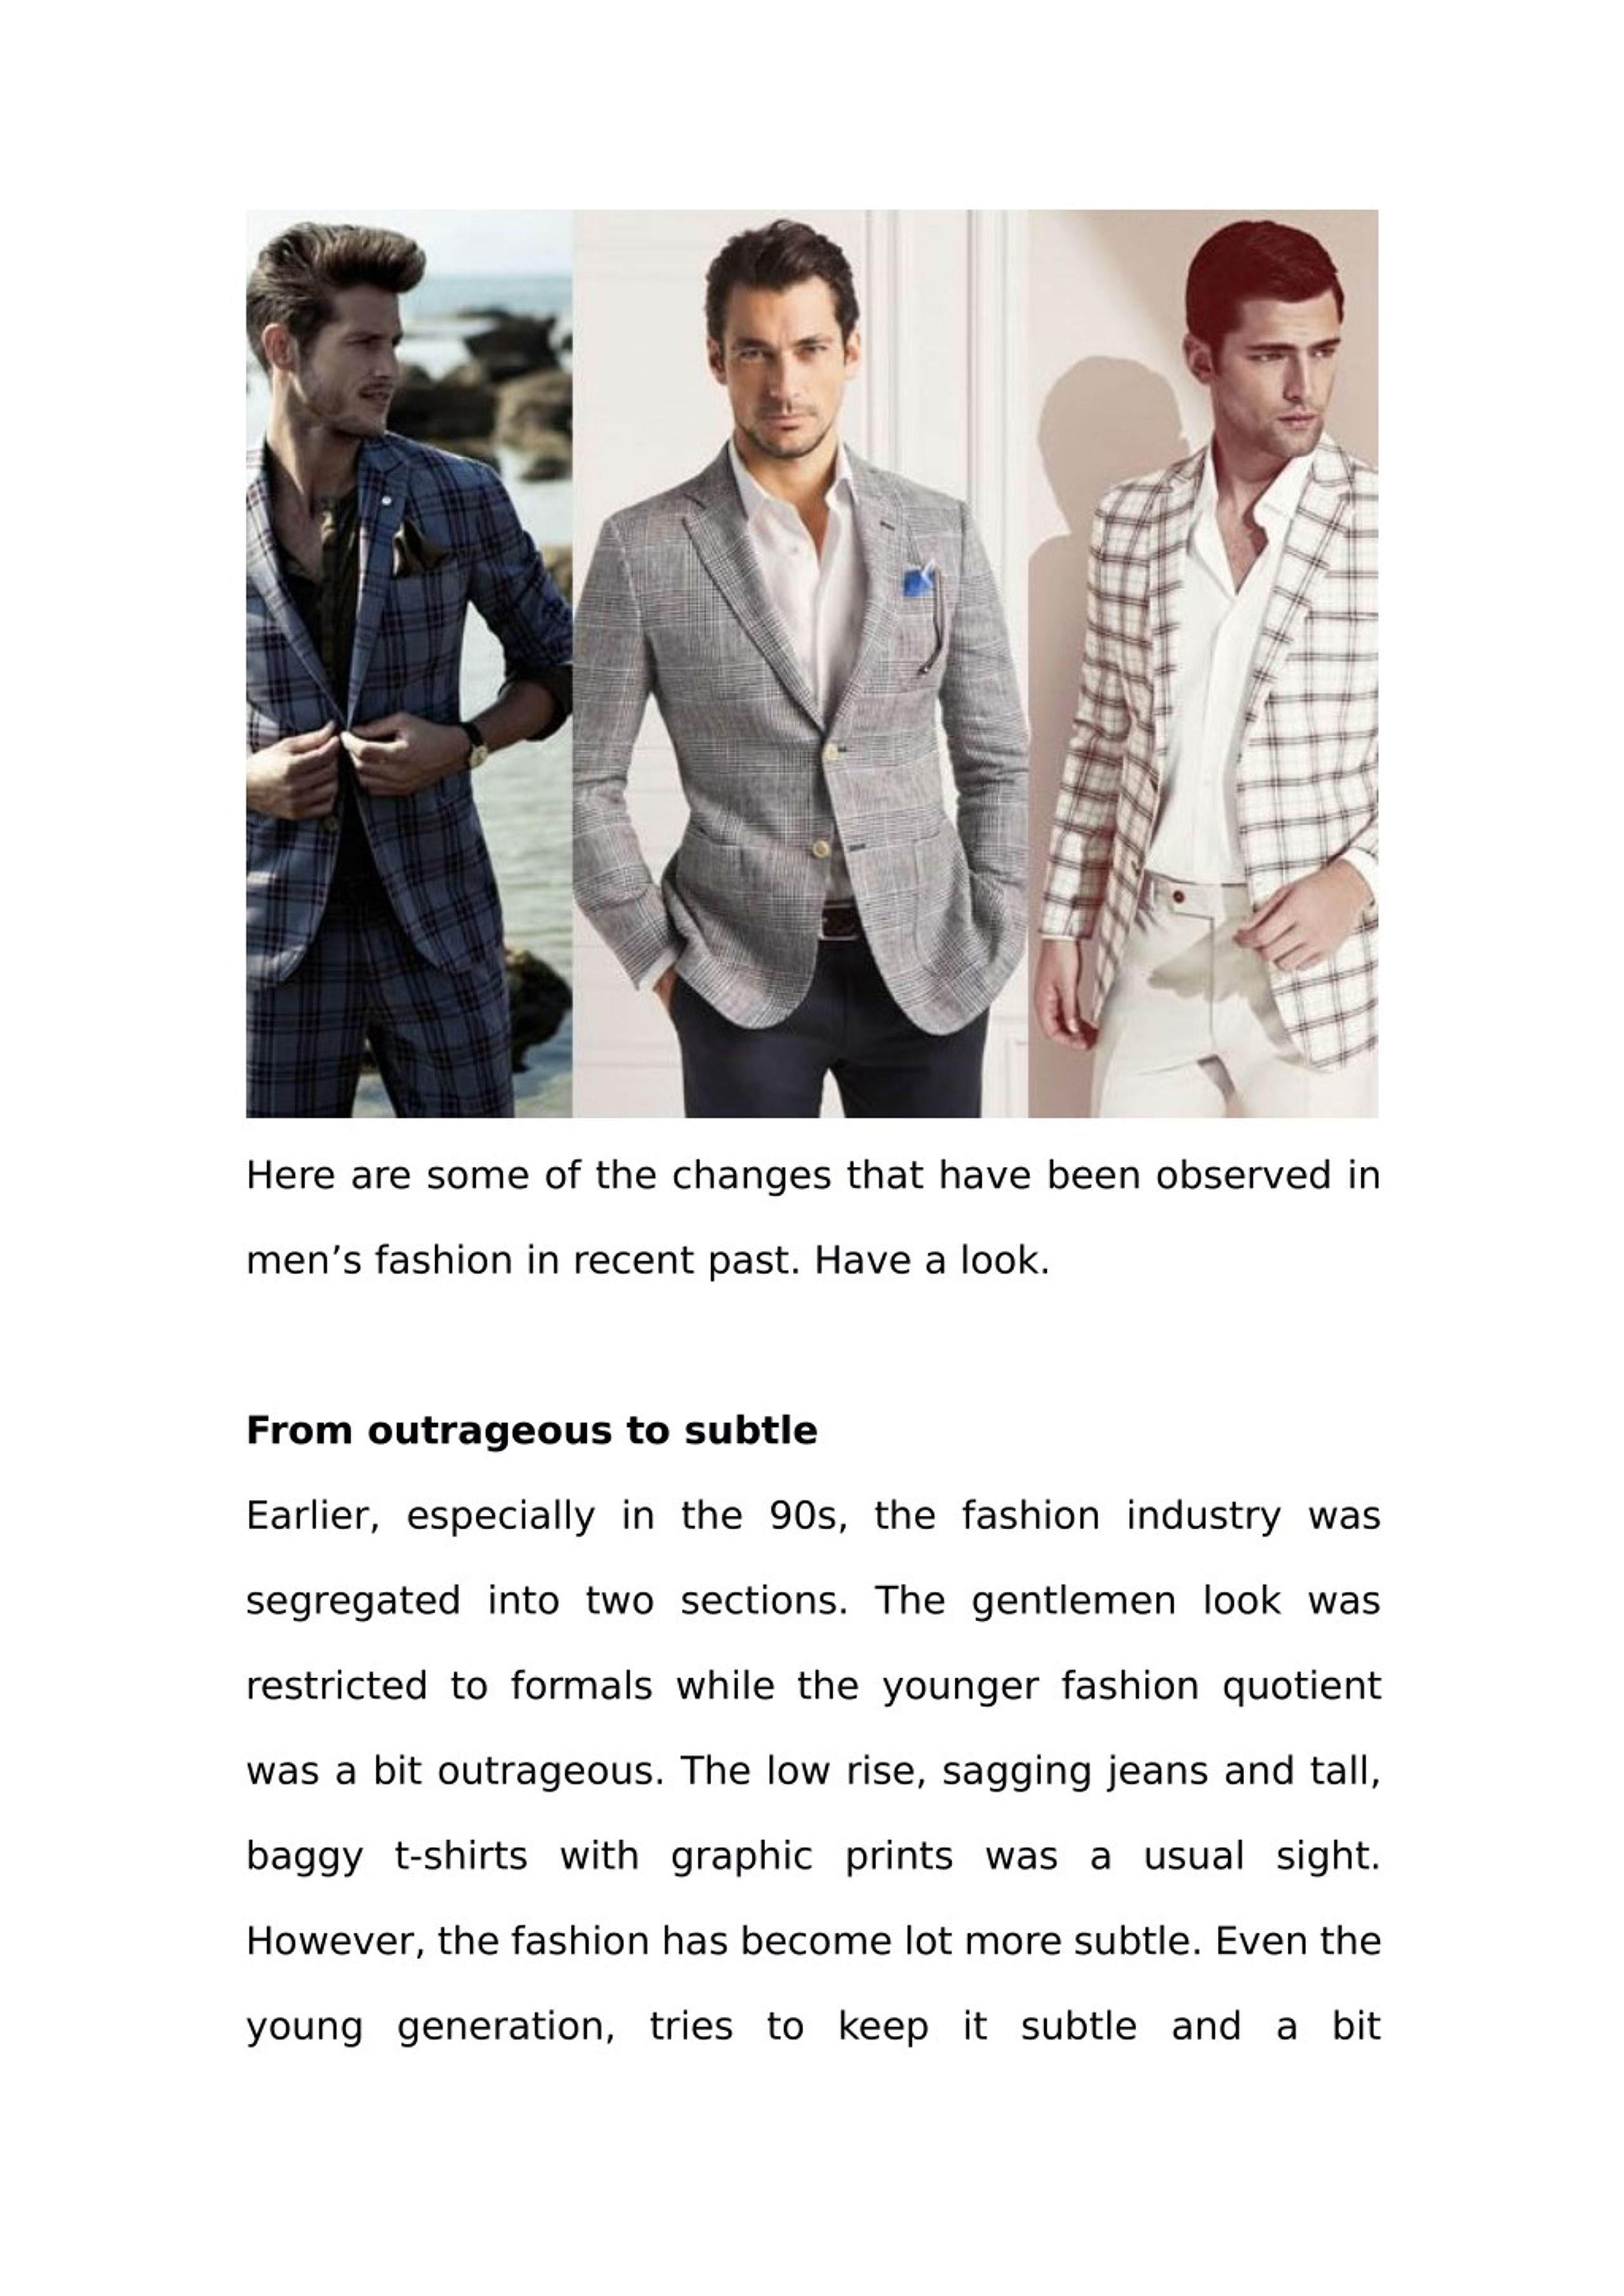 PPT - Men's fashion: Changes observed in last decade PowerPoint ...